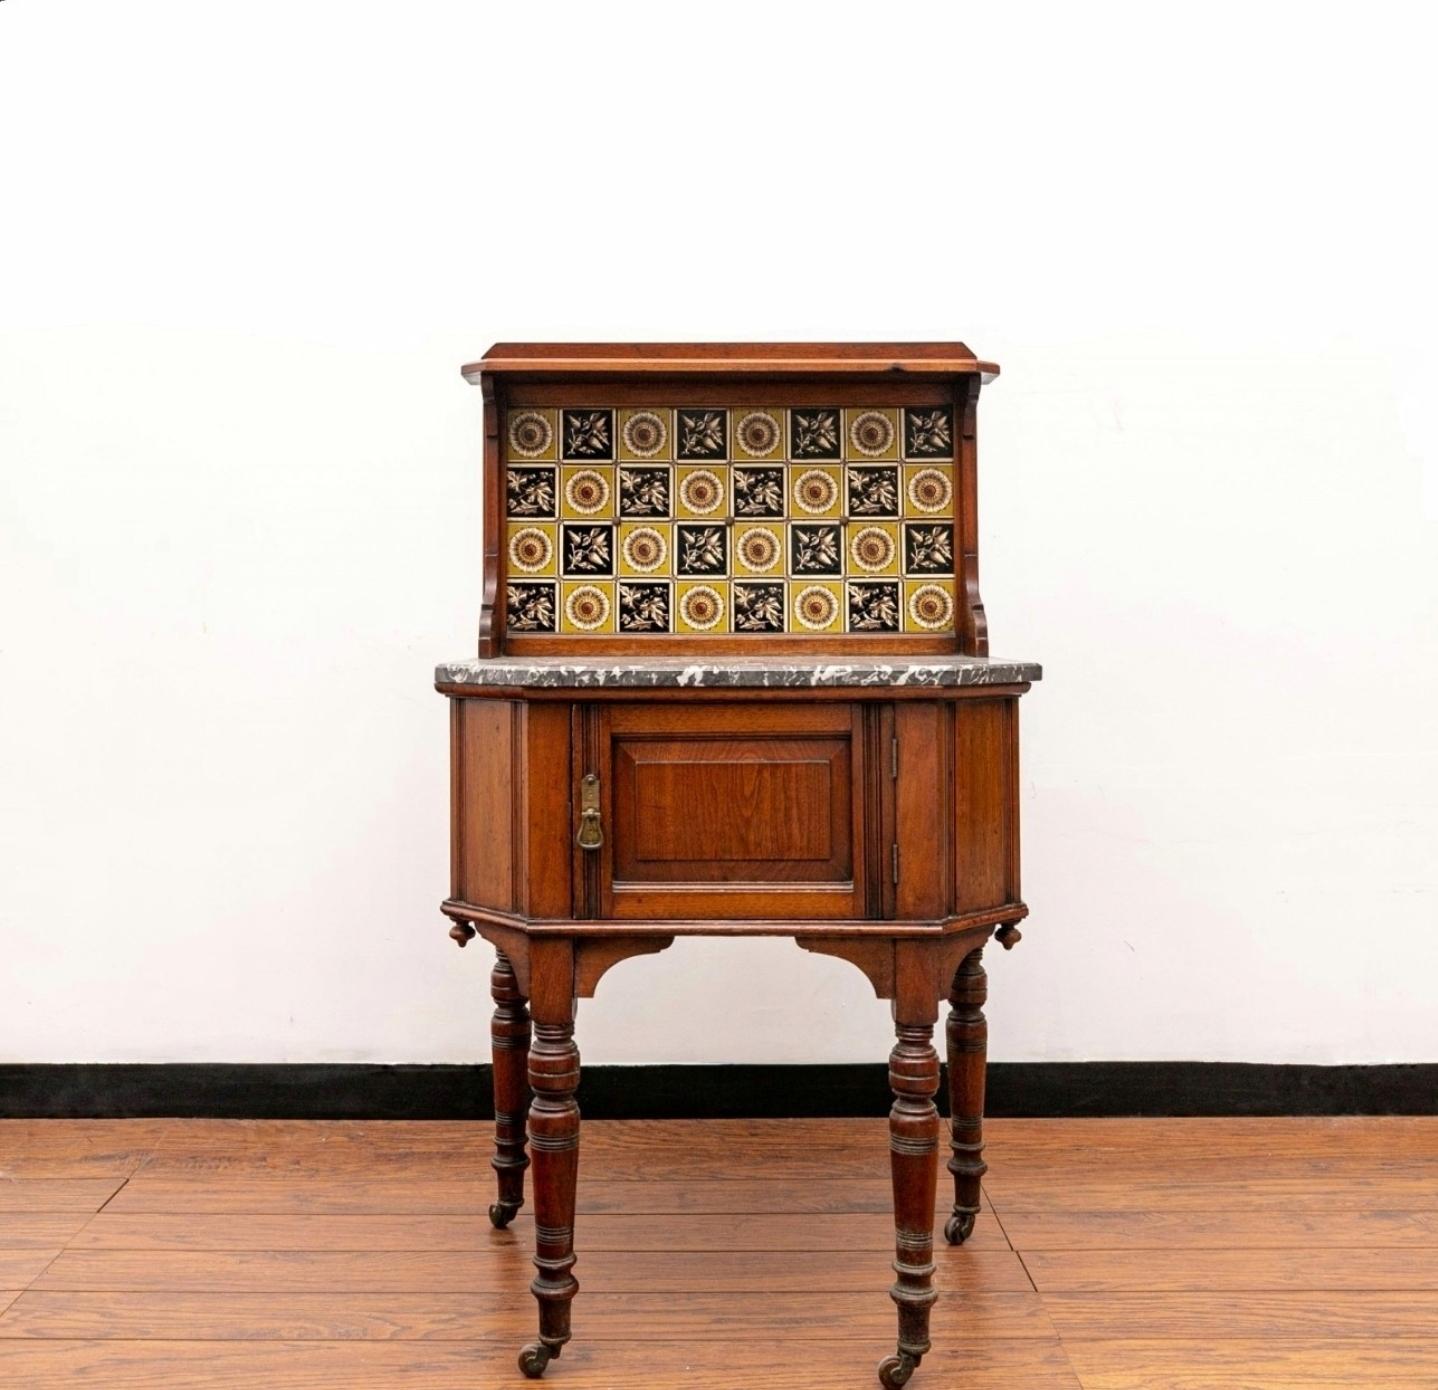 A charming antique Victorian era Eastlake style wash stand. circa 1880

Late 19th century, crafted of warm rich solid walnut with attractive grain detail, featuring a raised gallery with narrow shelf above a highly decorative inset floral and